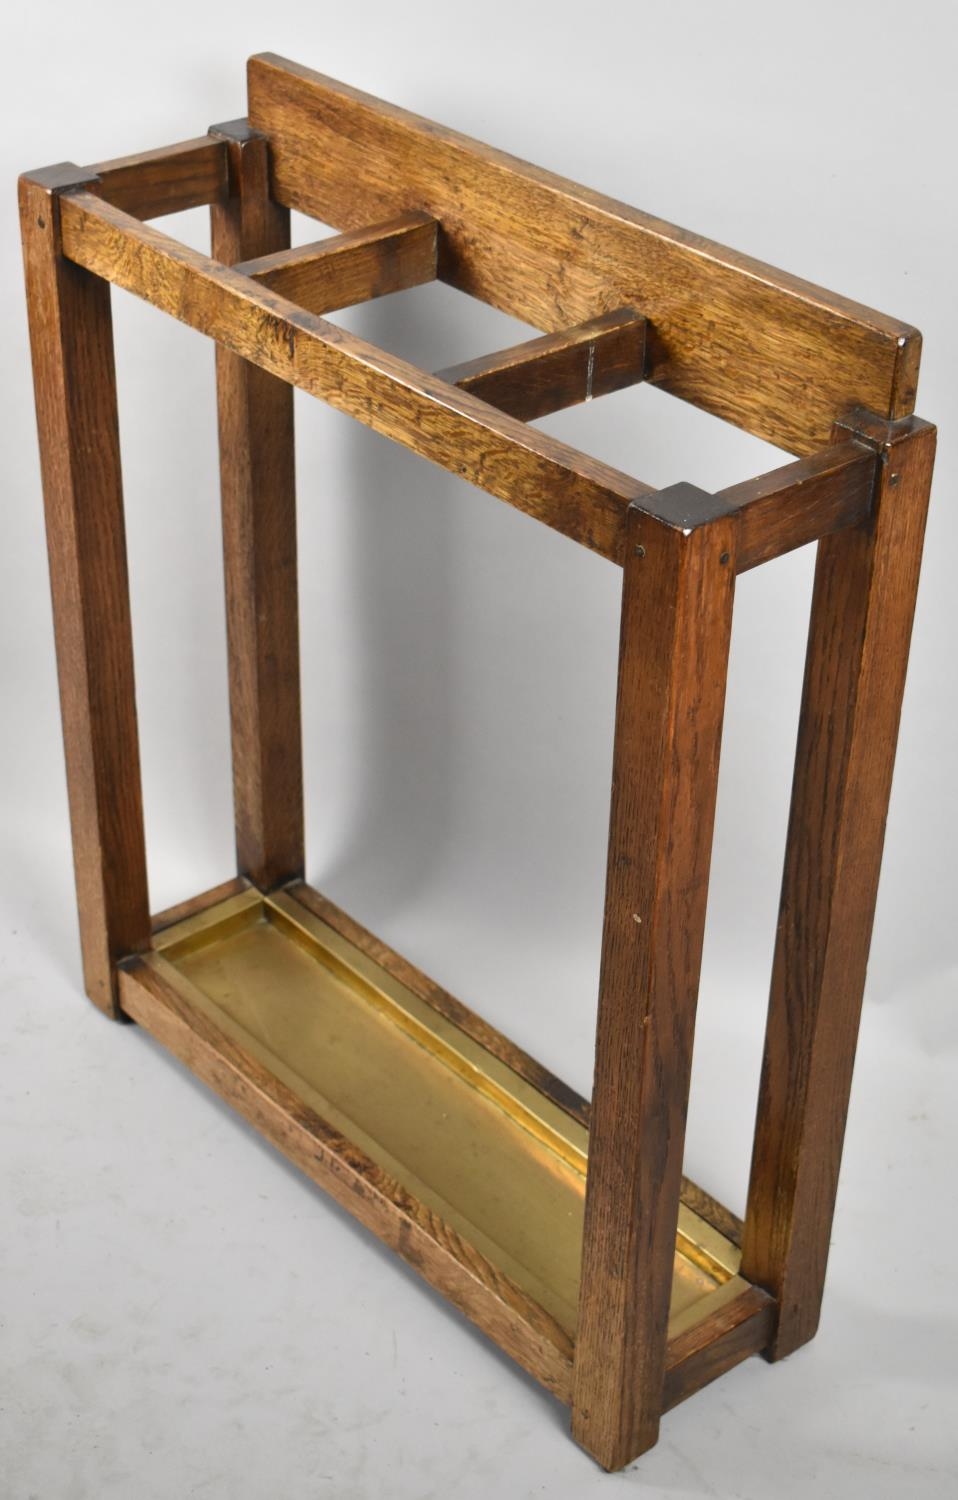 An Art Decio Oak Three Section Stick Stand with Brass Drip Tray, 66cm long - Image 2 of 2